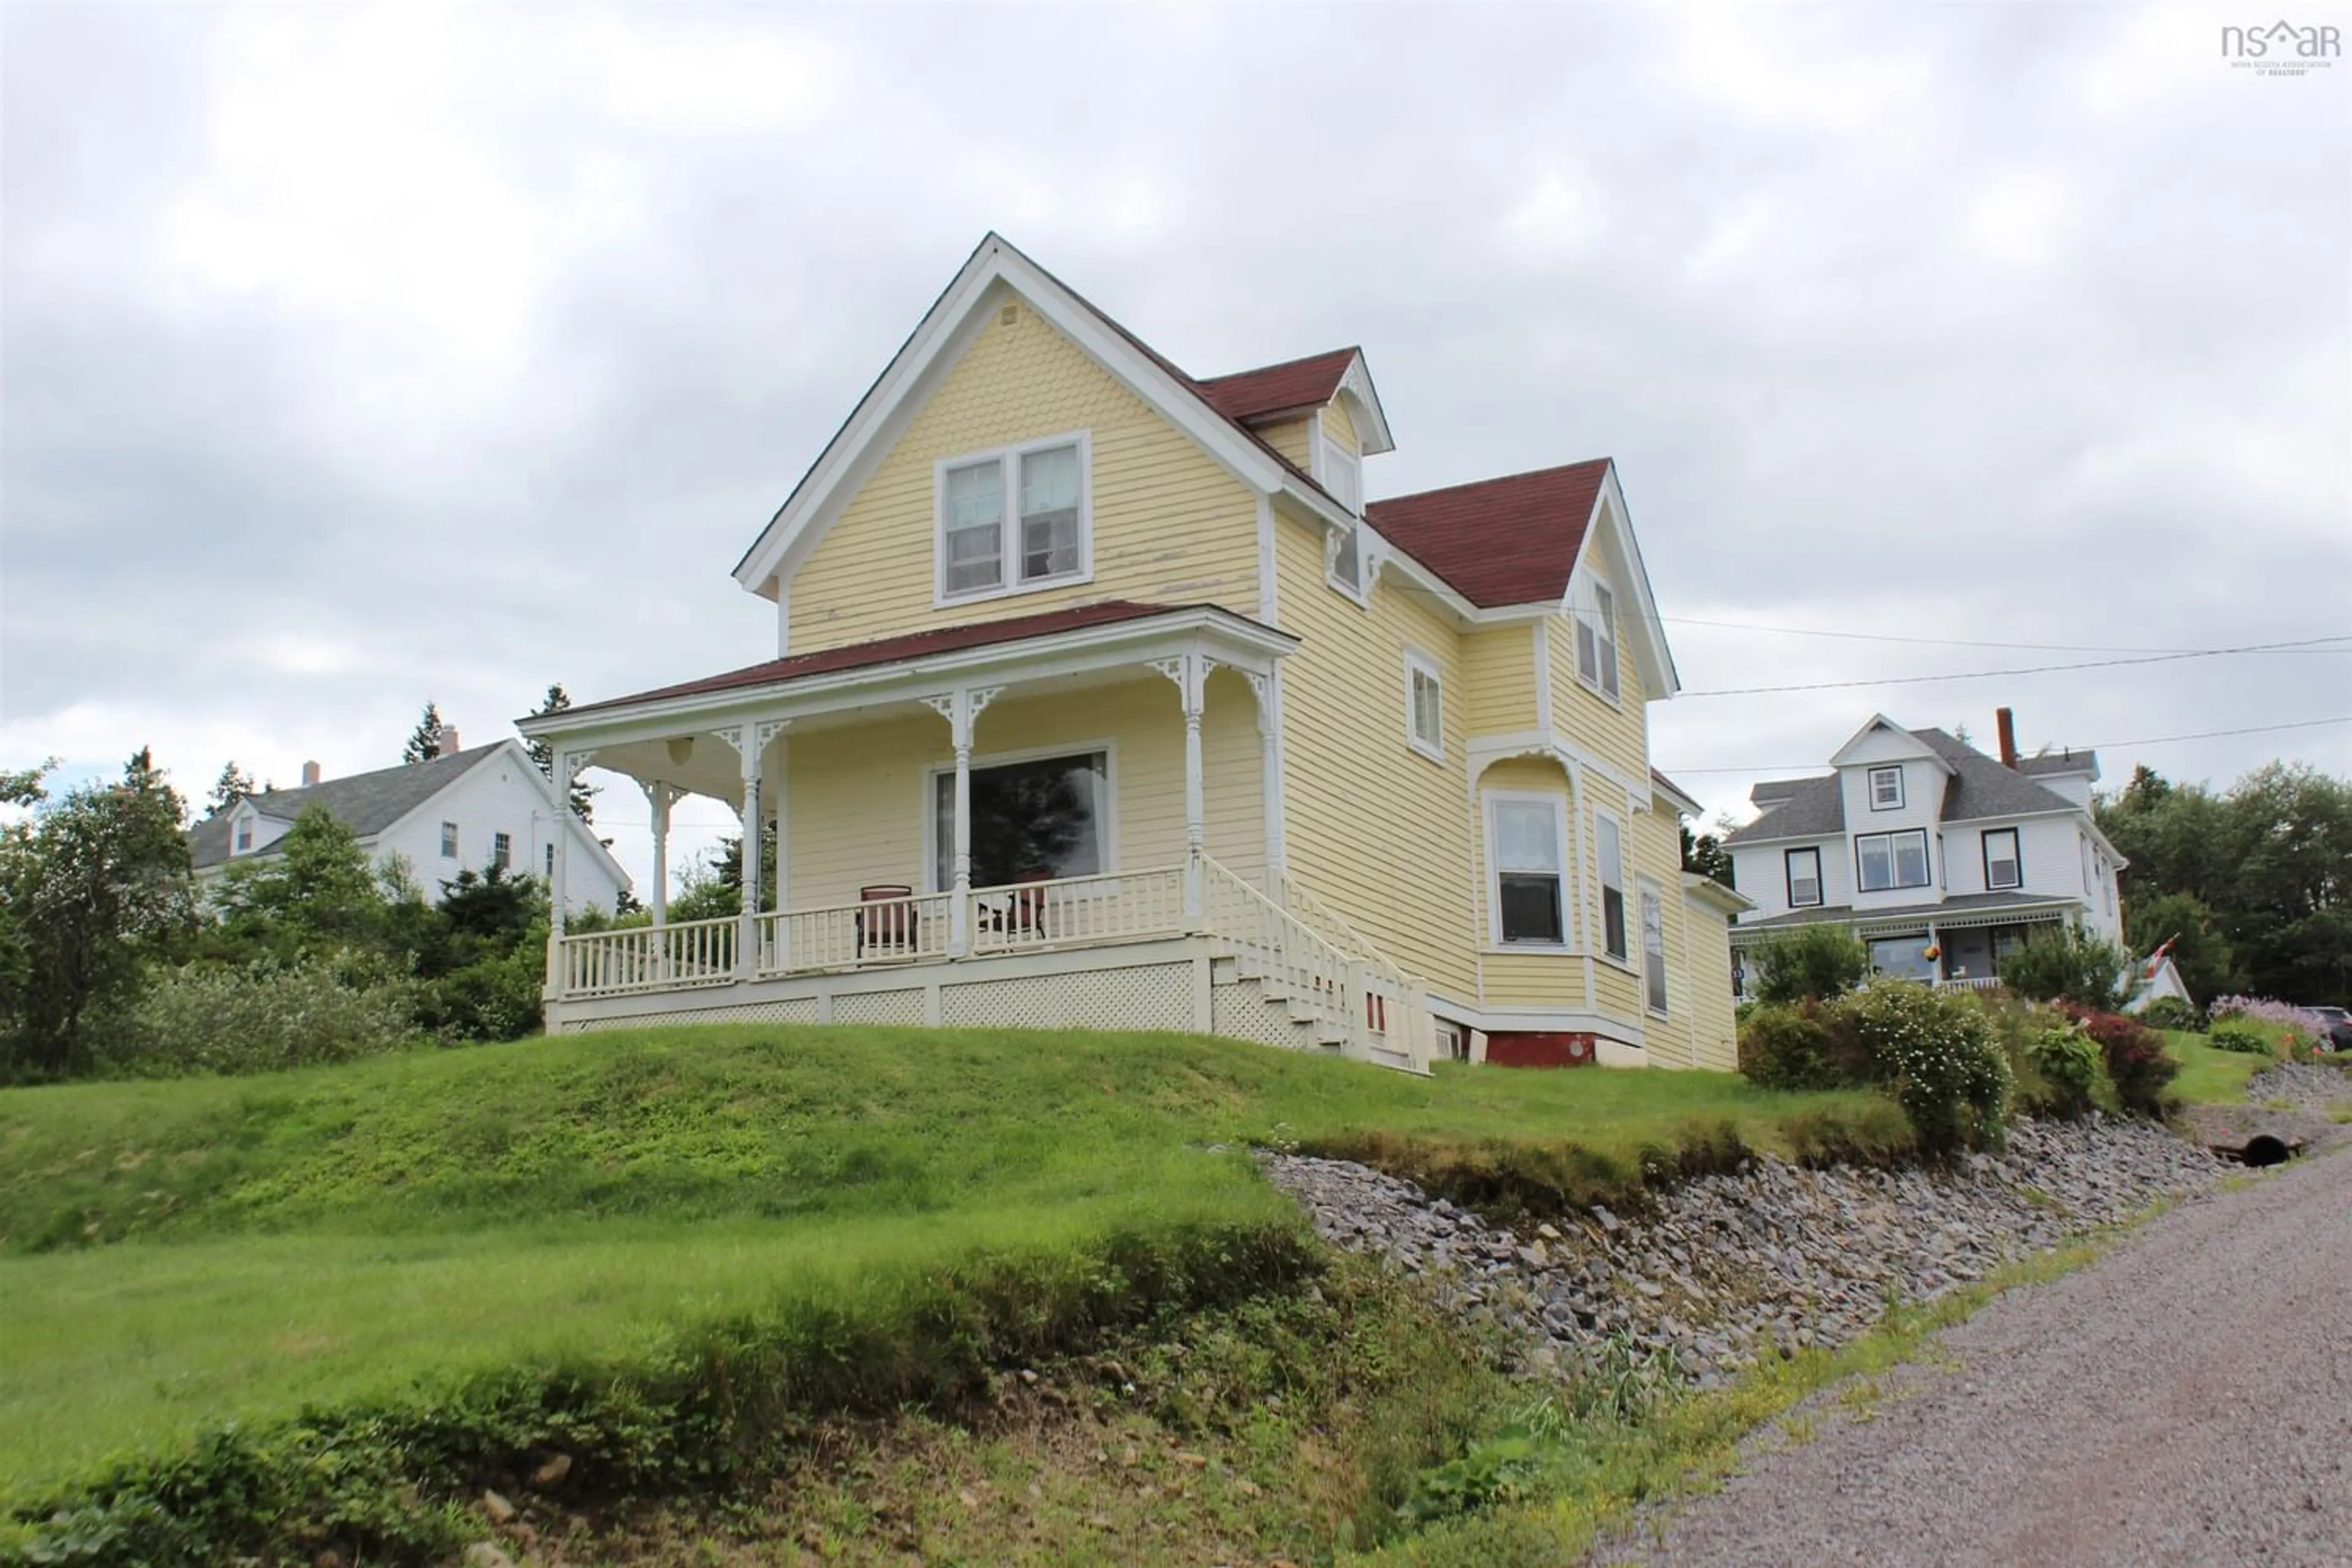 Outside view for 33 Macmillan Hill Rd, Isaacs Harbour Nova Scotia B0H 1S0